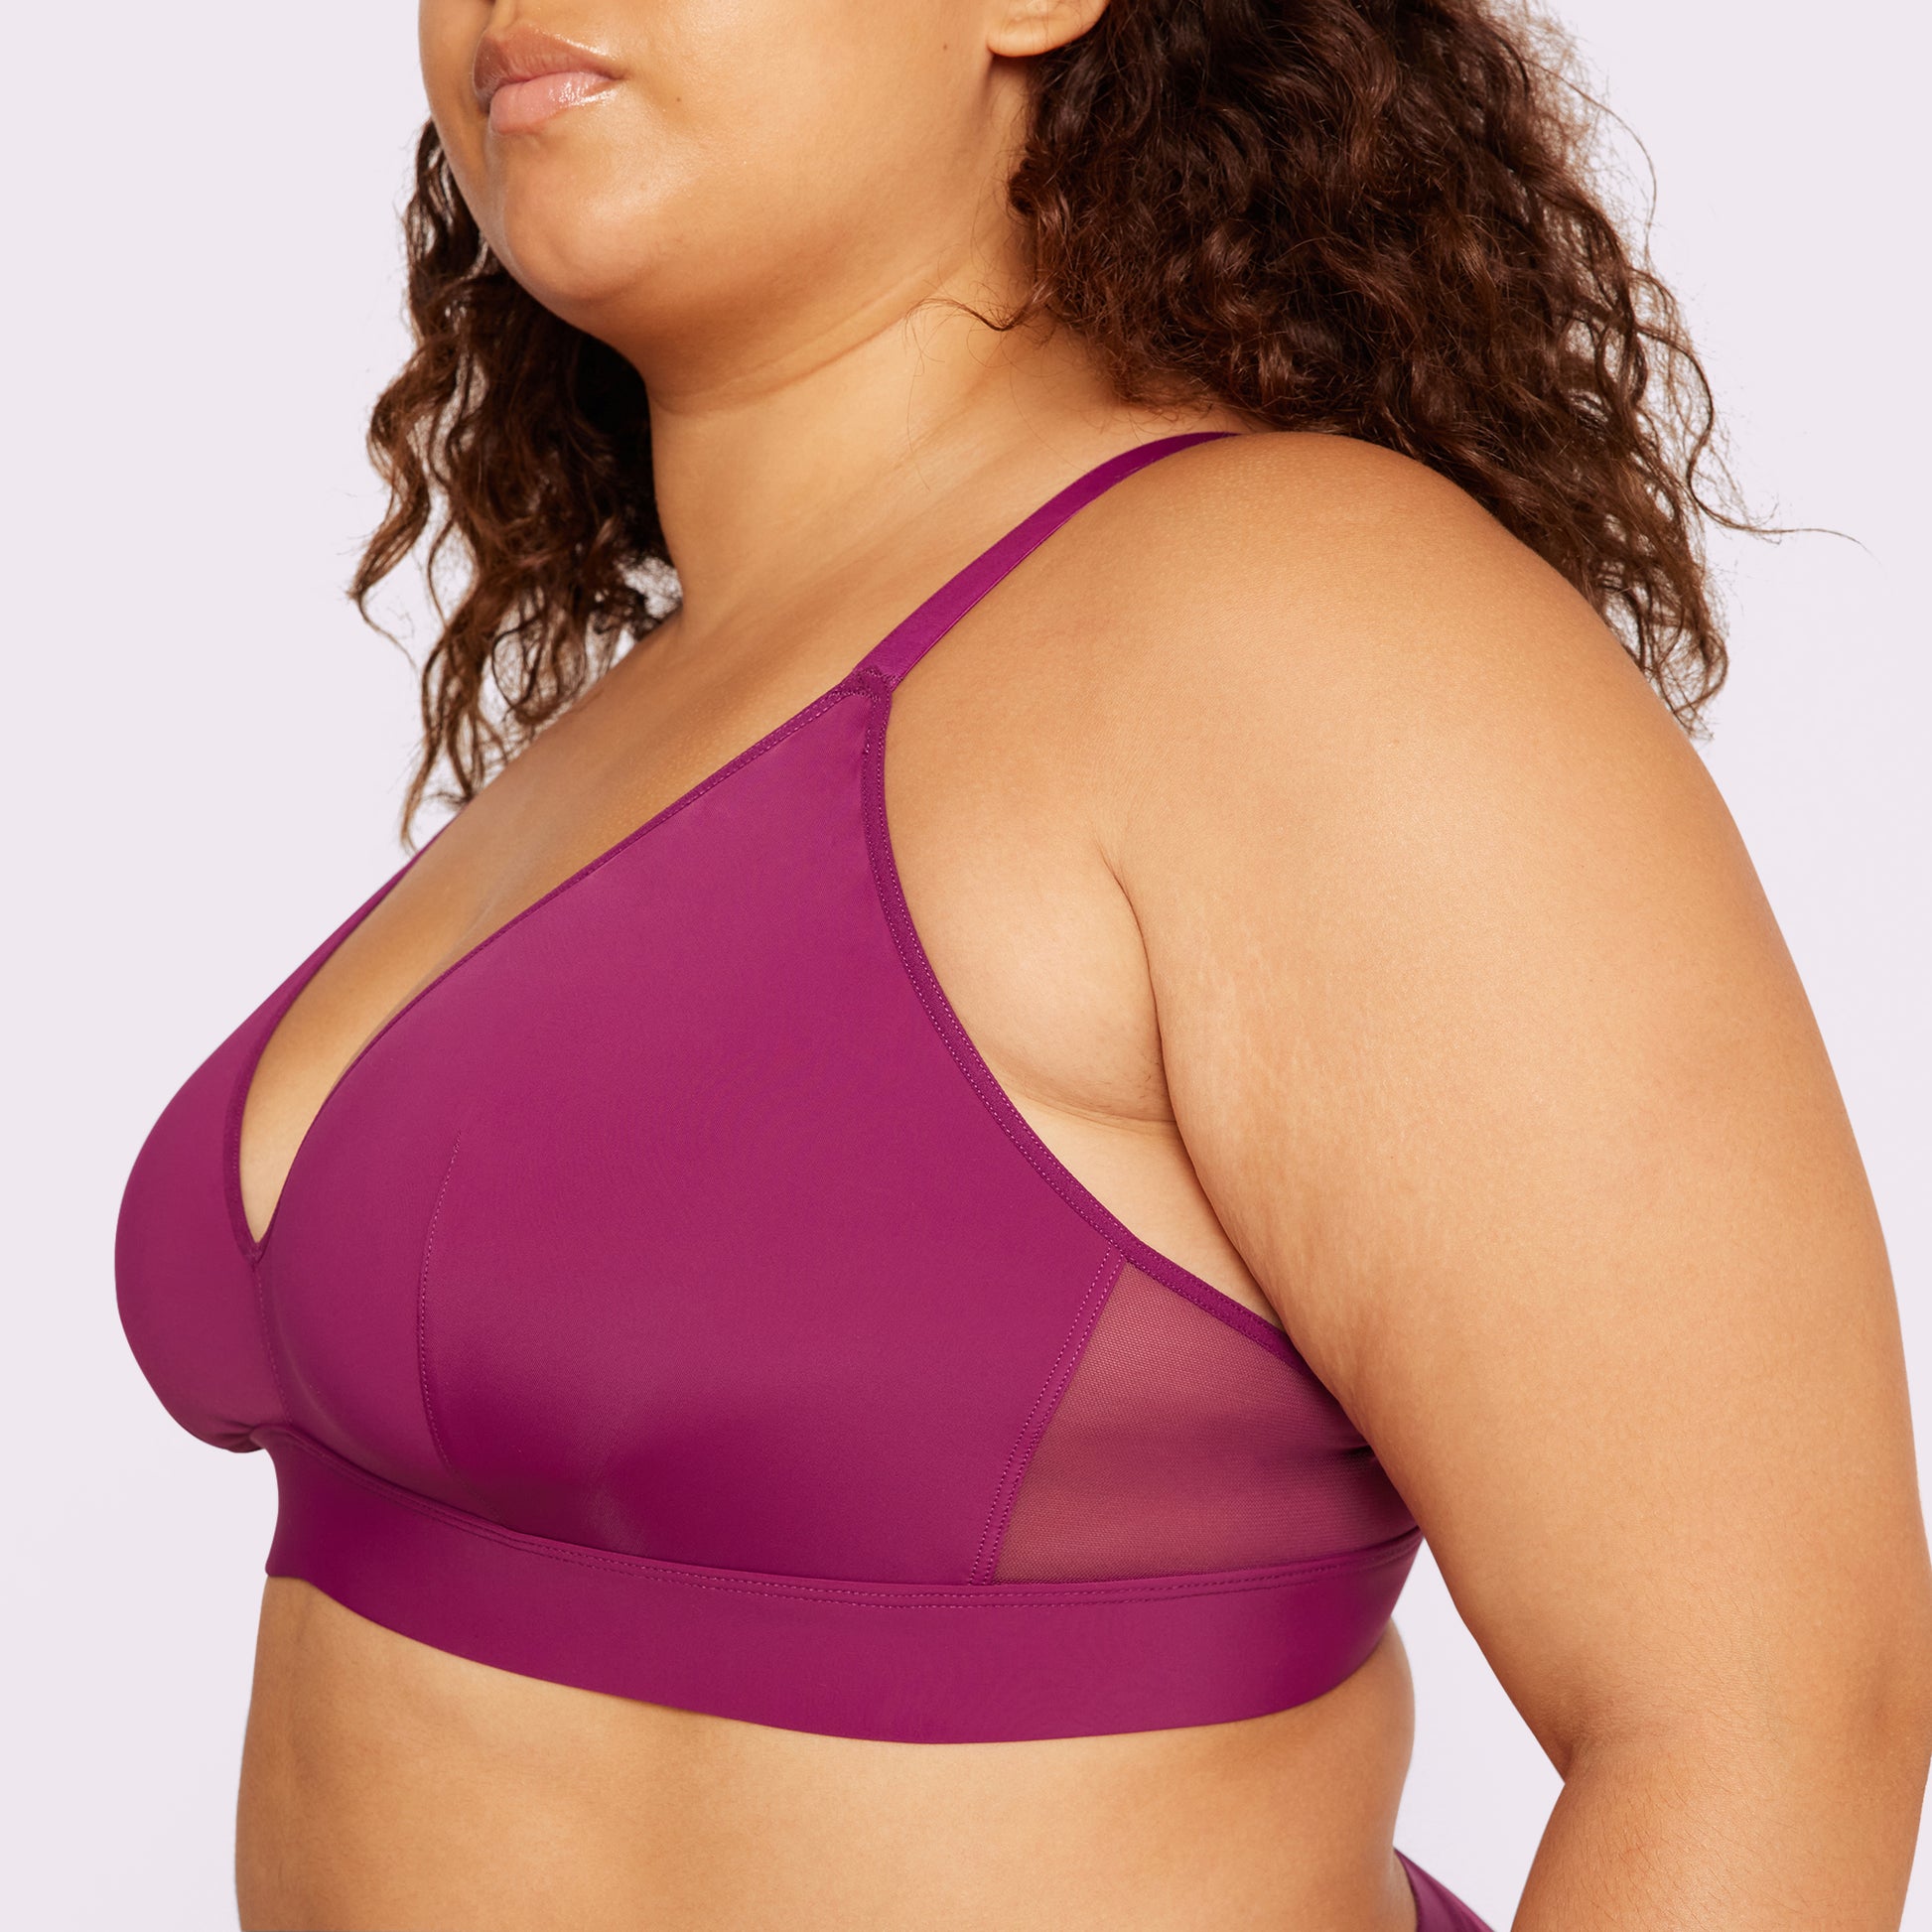 Invisible REextraSkin™ Triangle Plunge Bra Top – Her own words